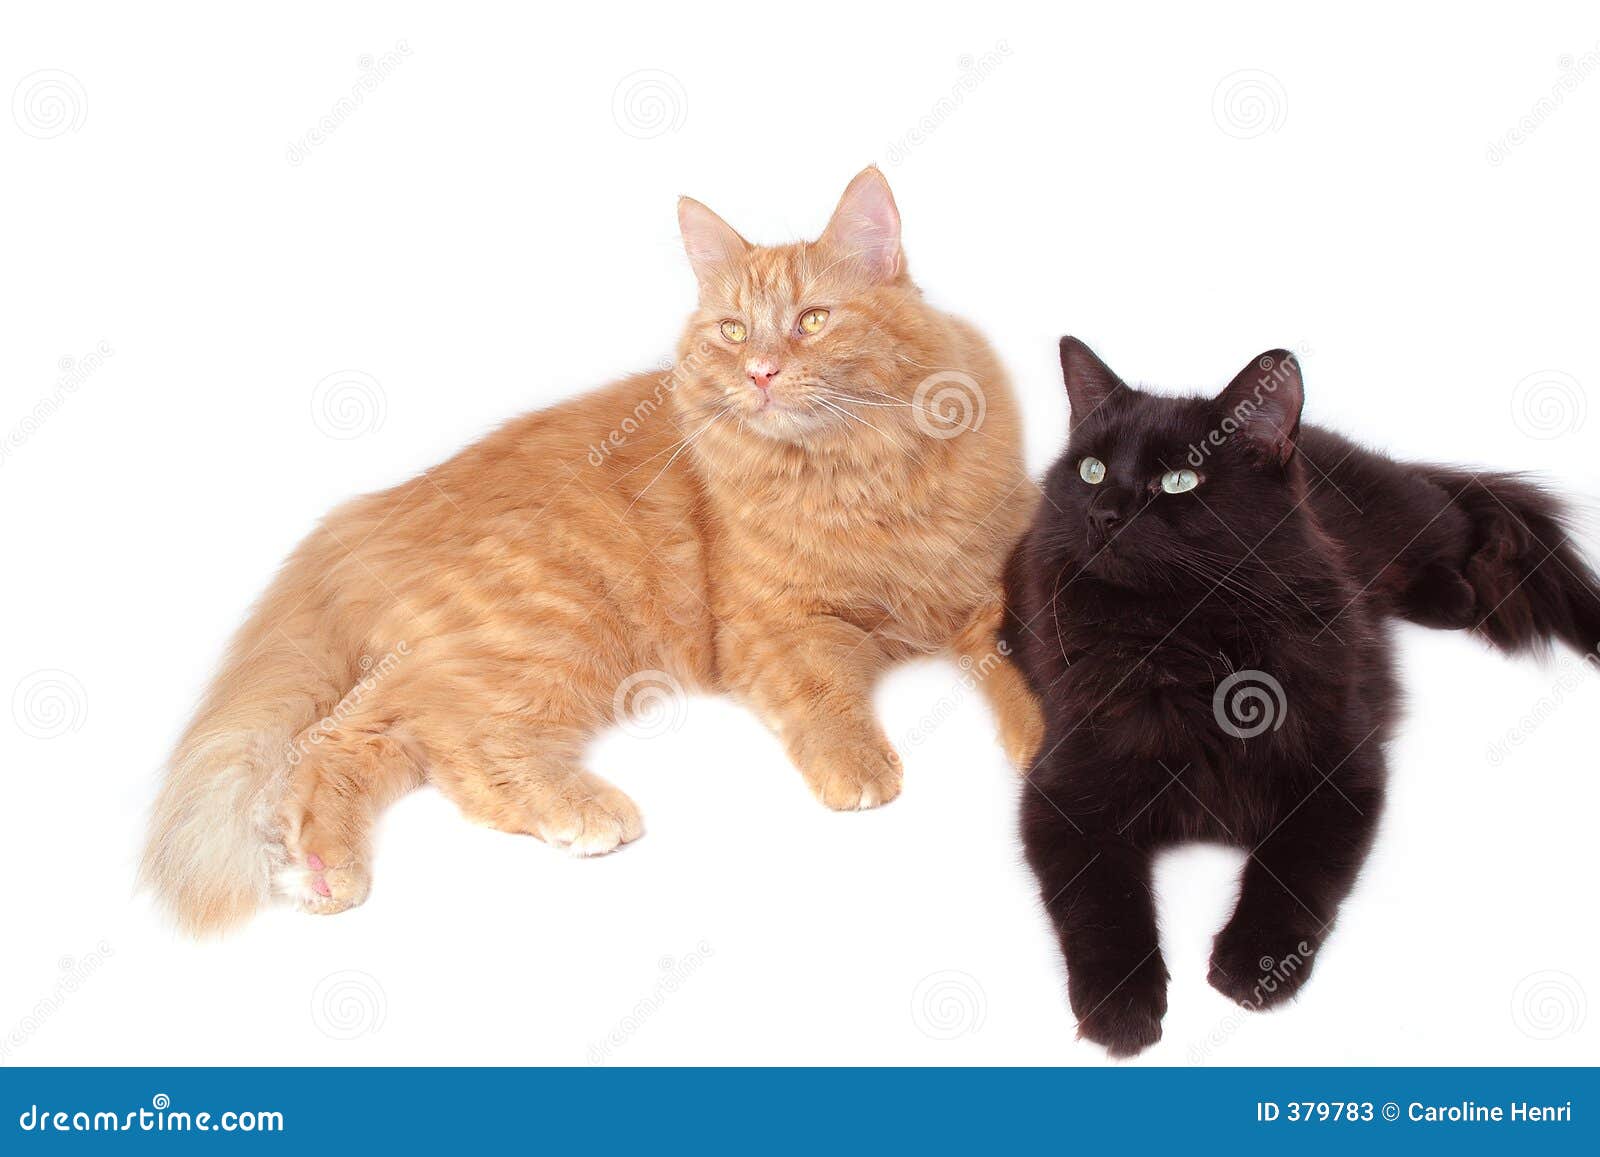  Red  and black  cat  friends stock image Image of black  